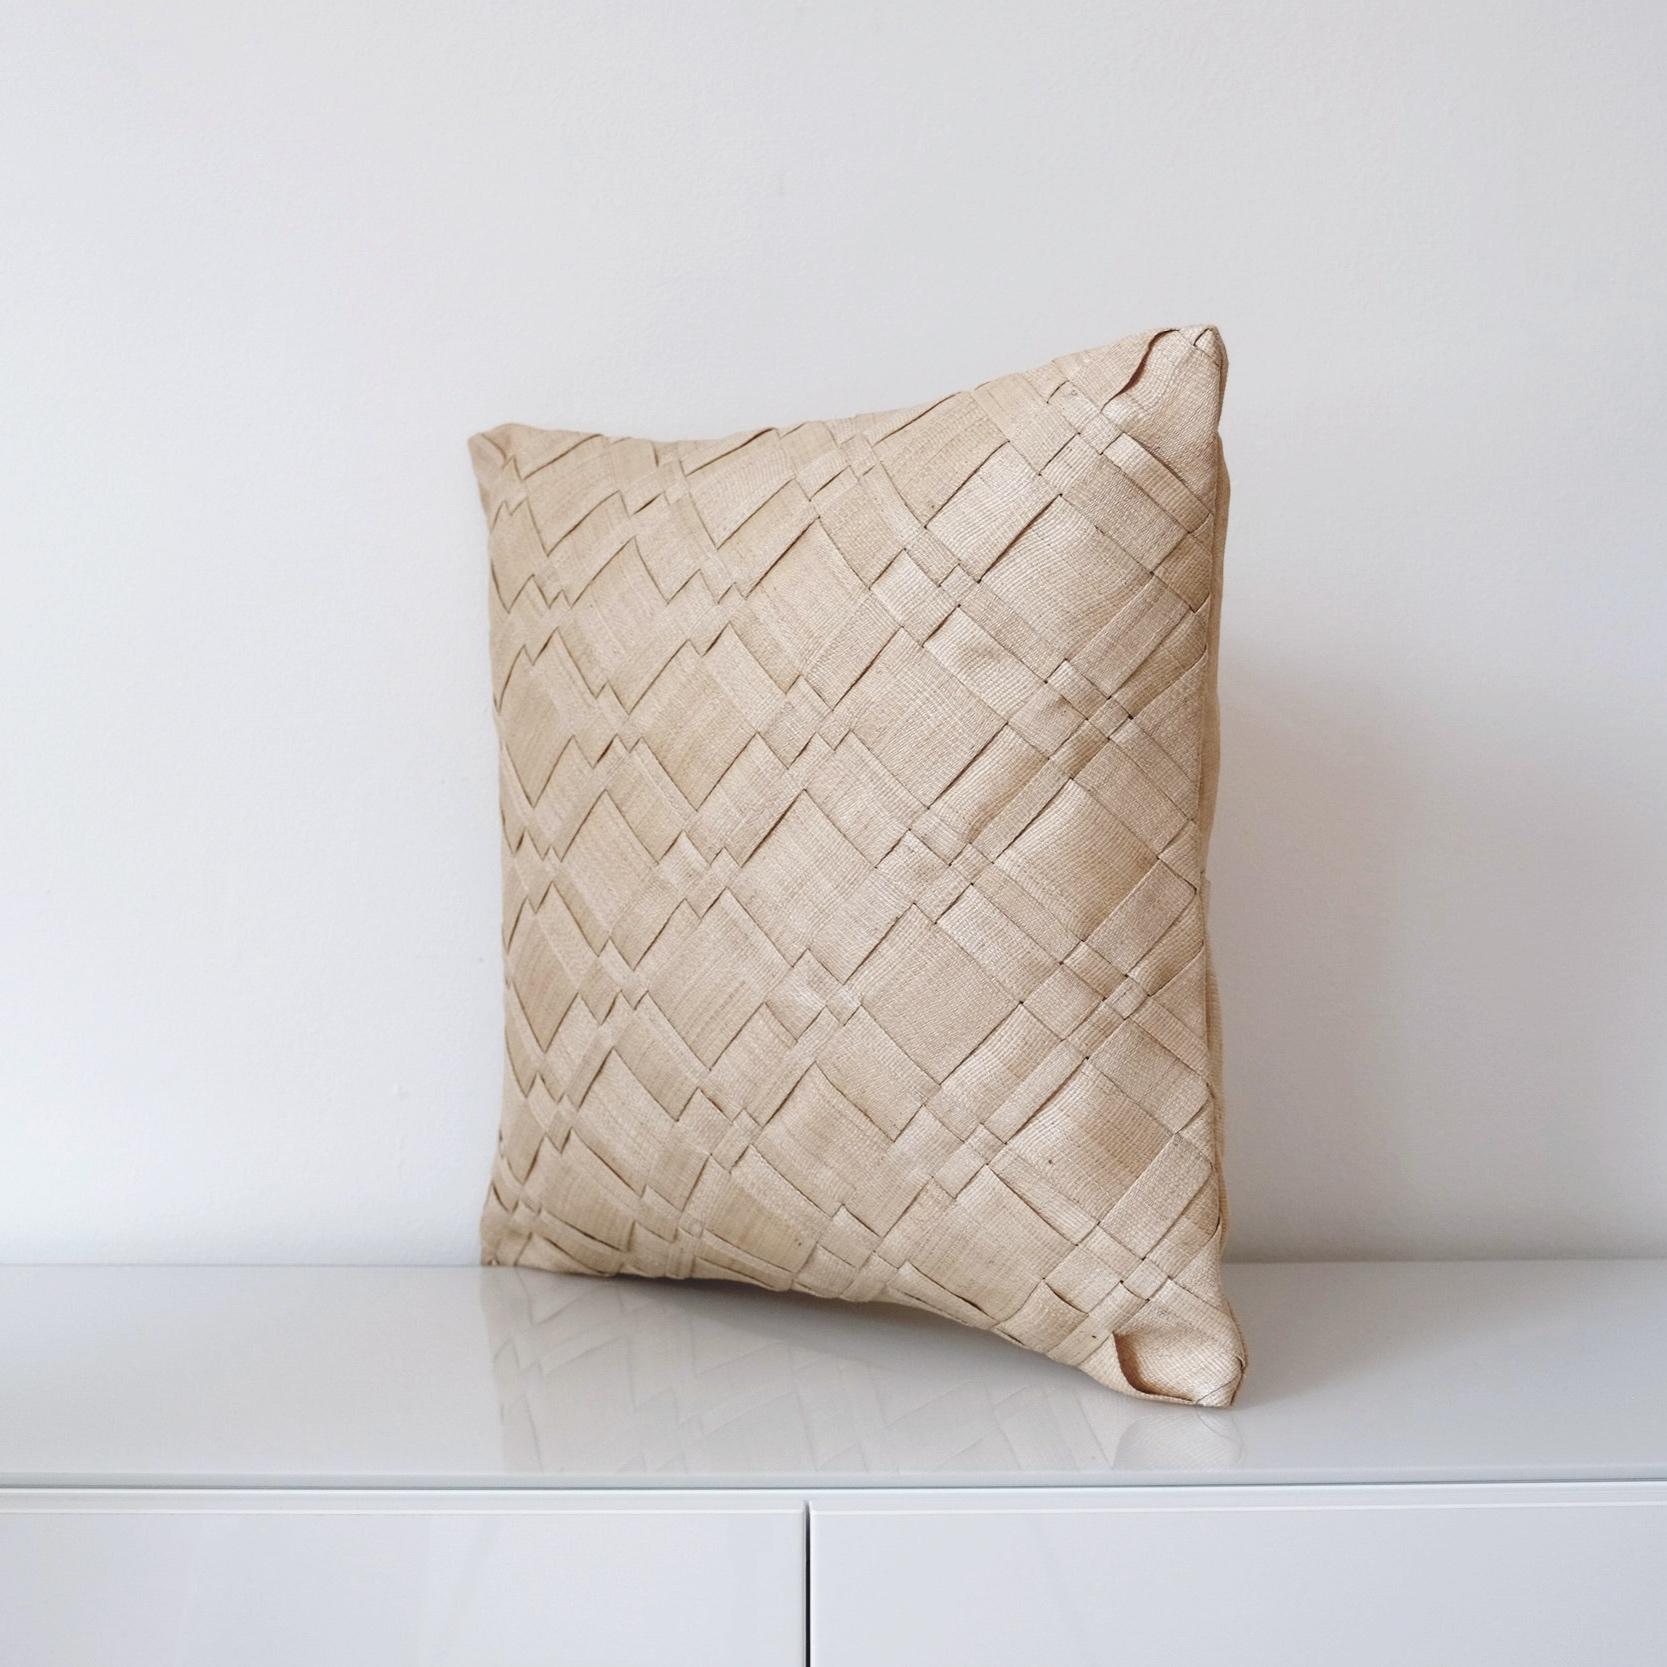 Handcrafted cushion cover made with naturally dyed and delicately woven T’nalak cloth from Abaca fibres and fastened with coconut shell buttons
Colour: light sand

50 x 50 cm
19.7? x 19.7?
Recommended cushion filler: 61 x 61 cm / 24? x